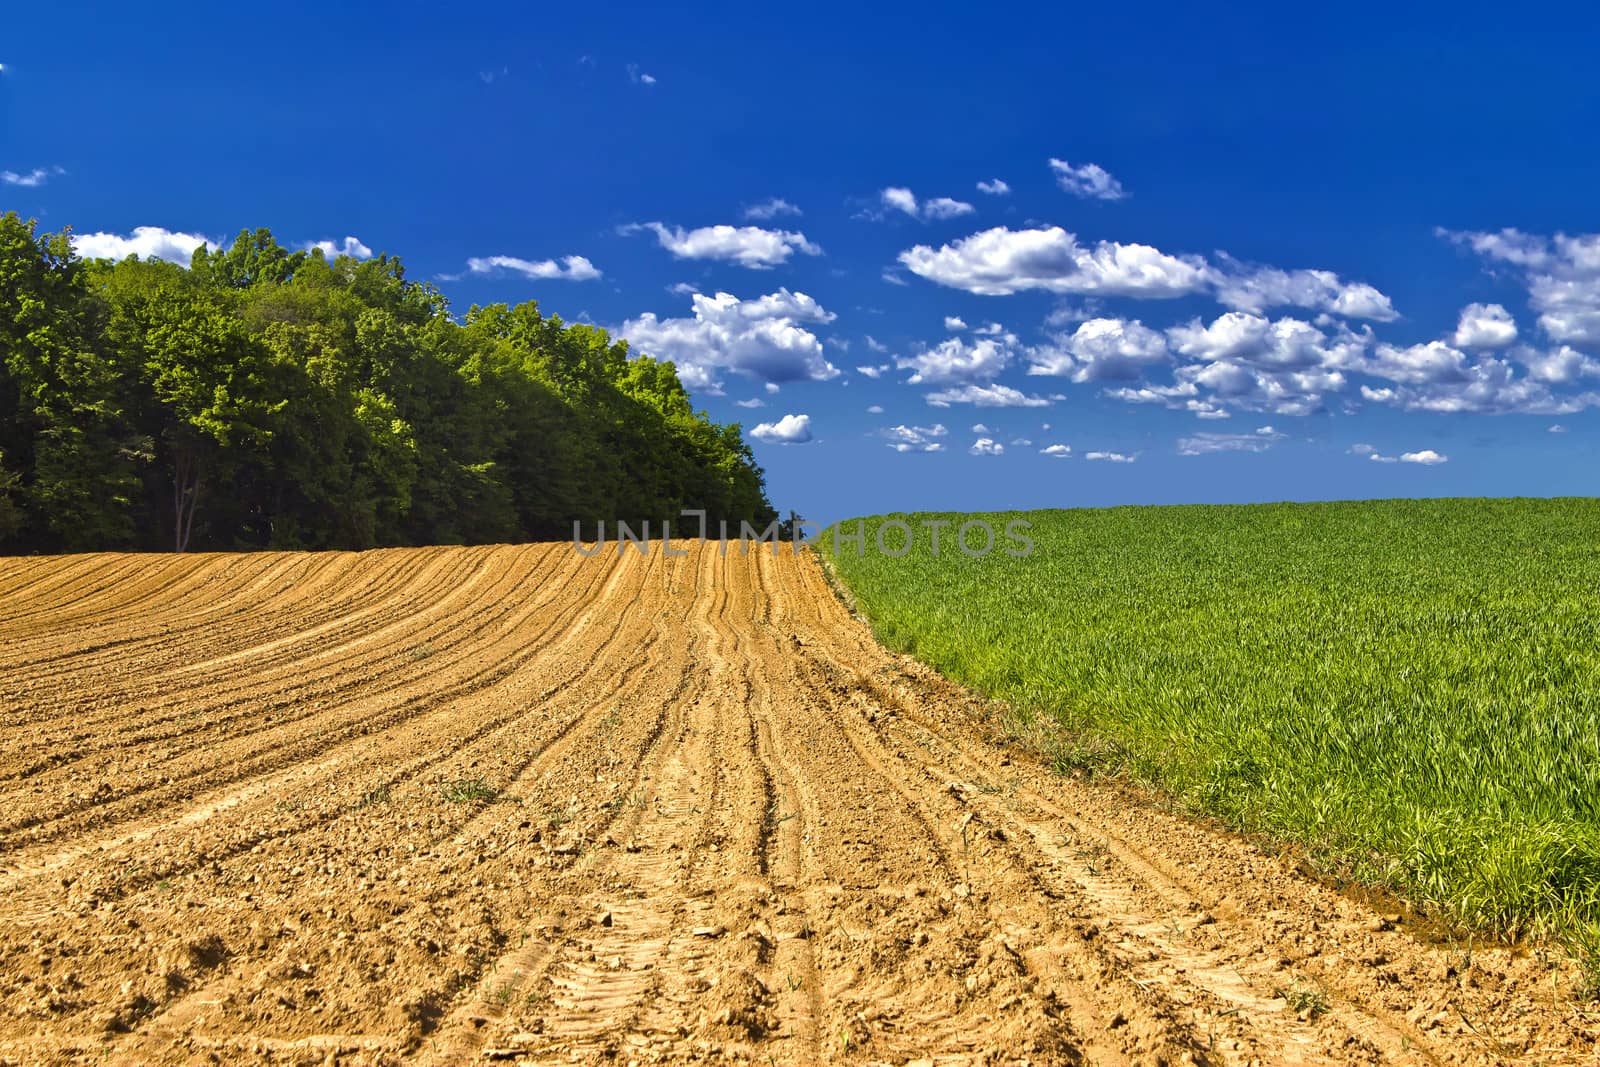 Agricultural landscape - young corn field, hay field and forest under blue sky